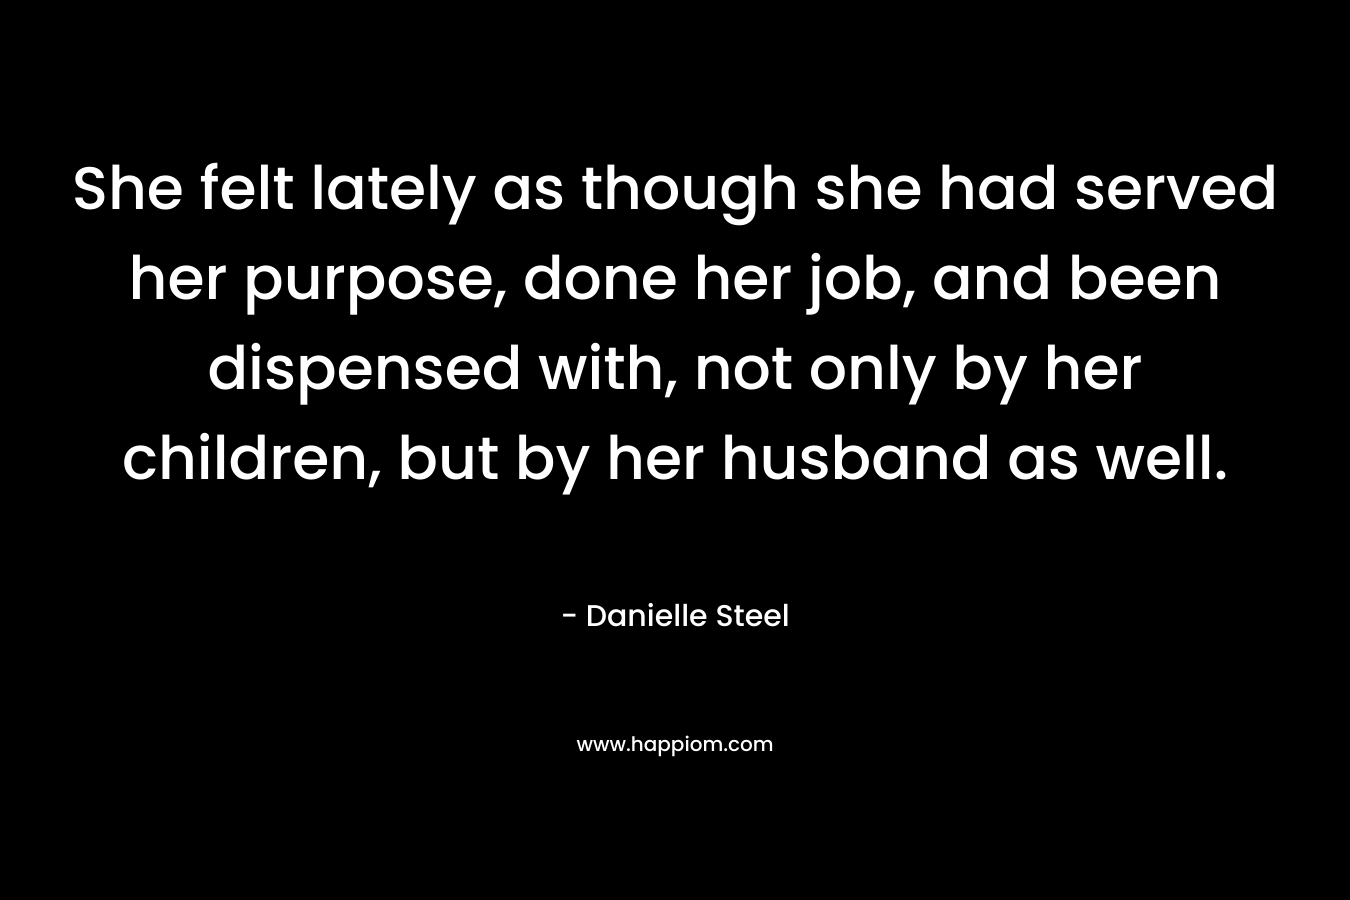 She felt lately as though she had served her purpose, done her job, and been dispensed with, not only by her children, but by her husband as well. – Danielle Steel